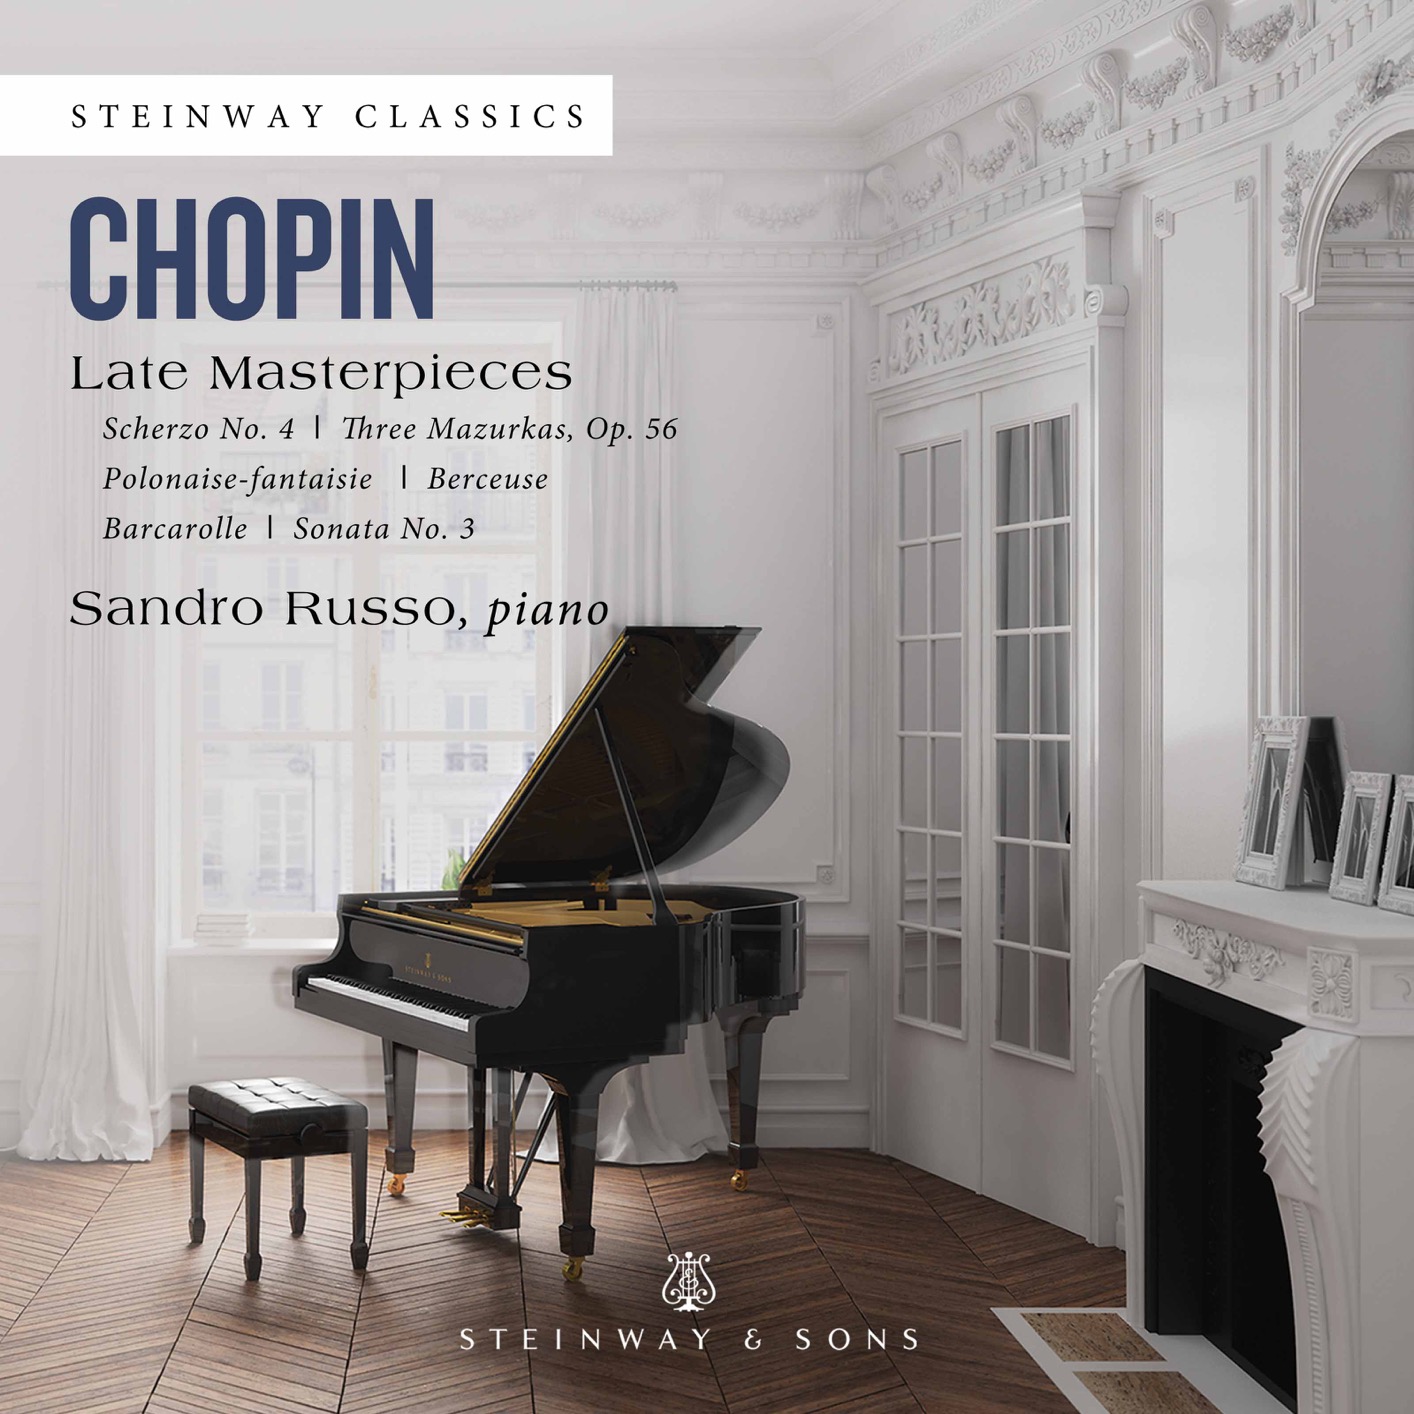 Sandro Russo – Chopin: Late Piano Masterpieces (2019) [FLAC 24bit/96kHz]